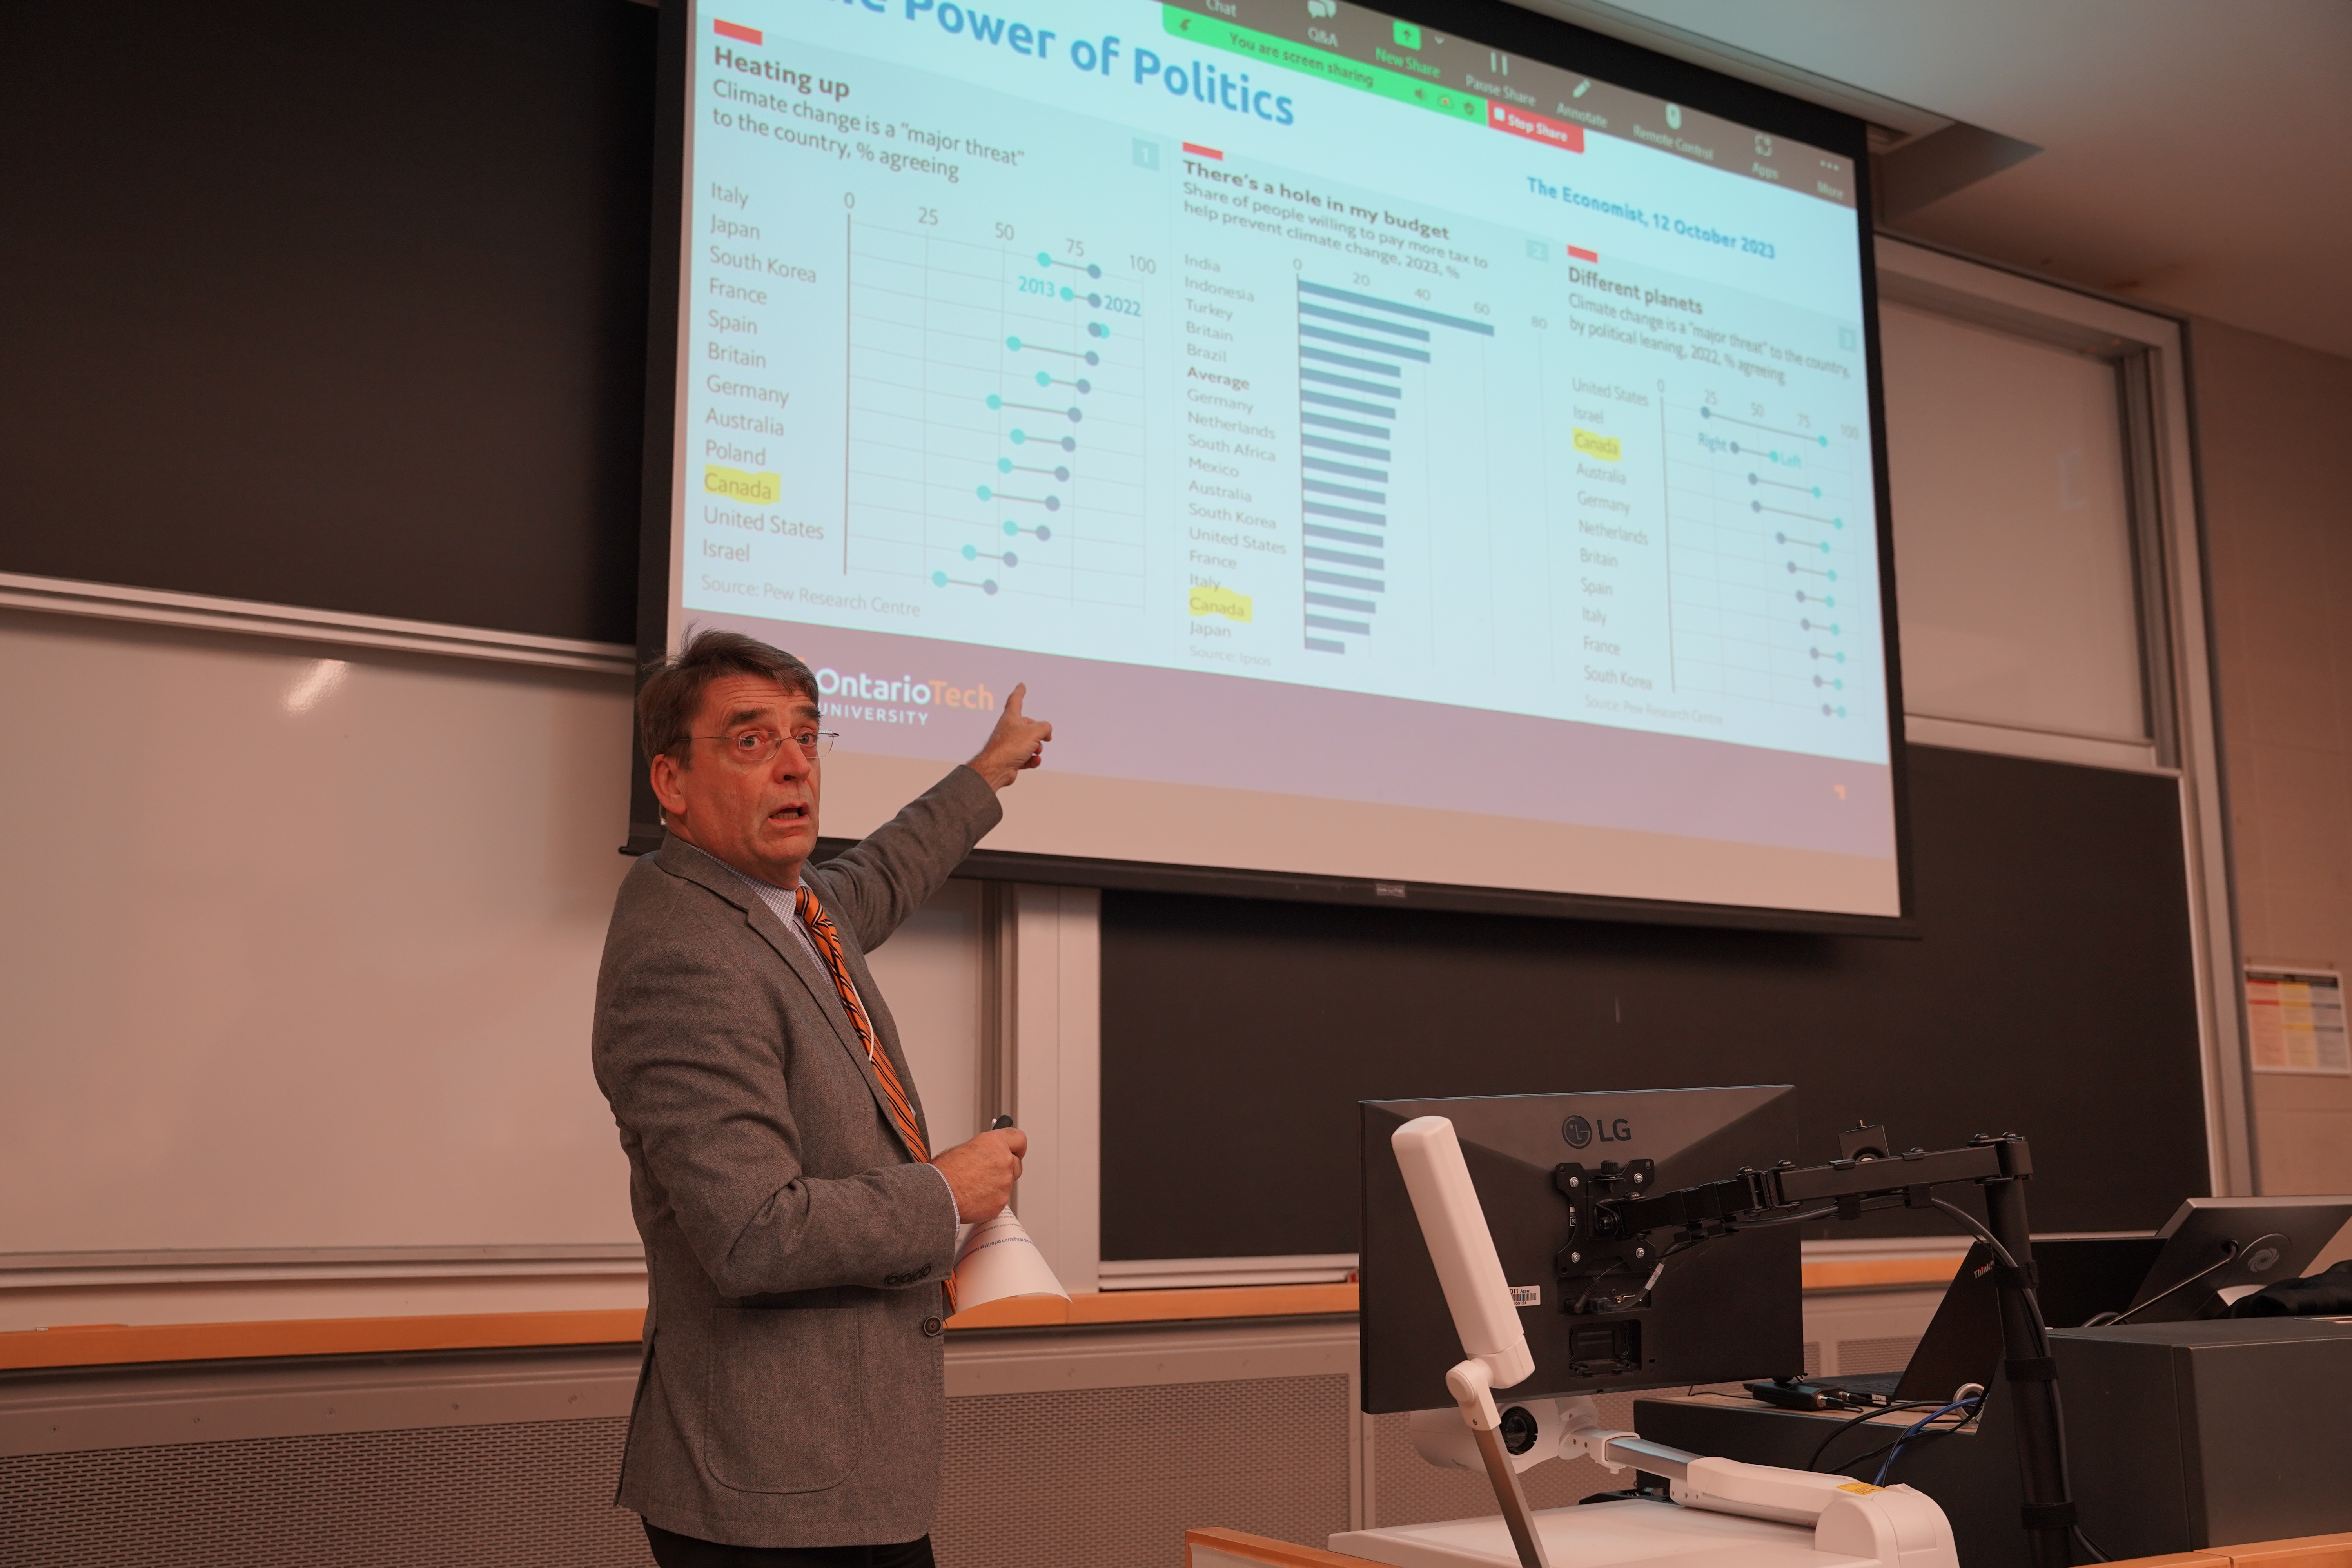 A man stands pointing at a presentation behind him that includes several graphics.